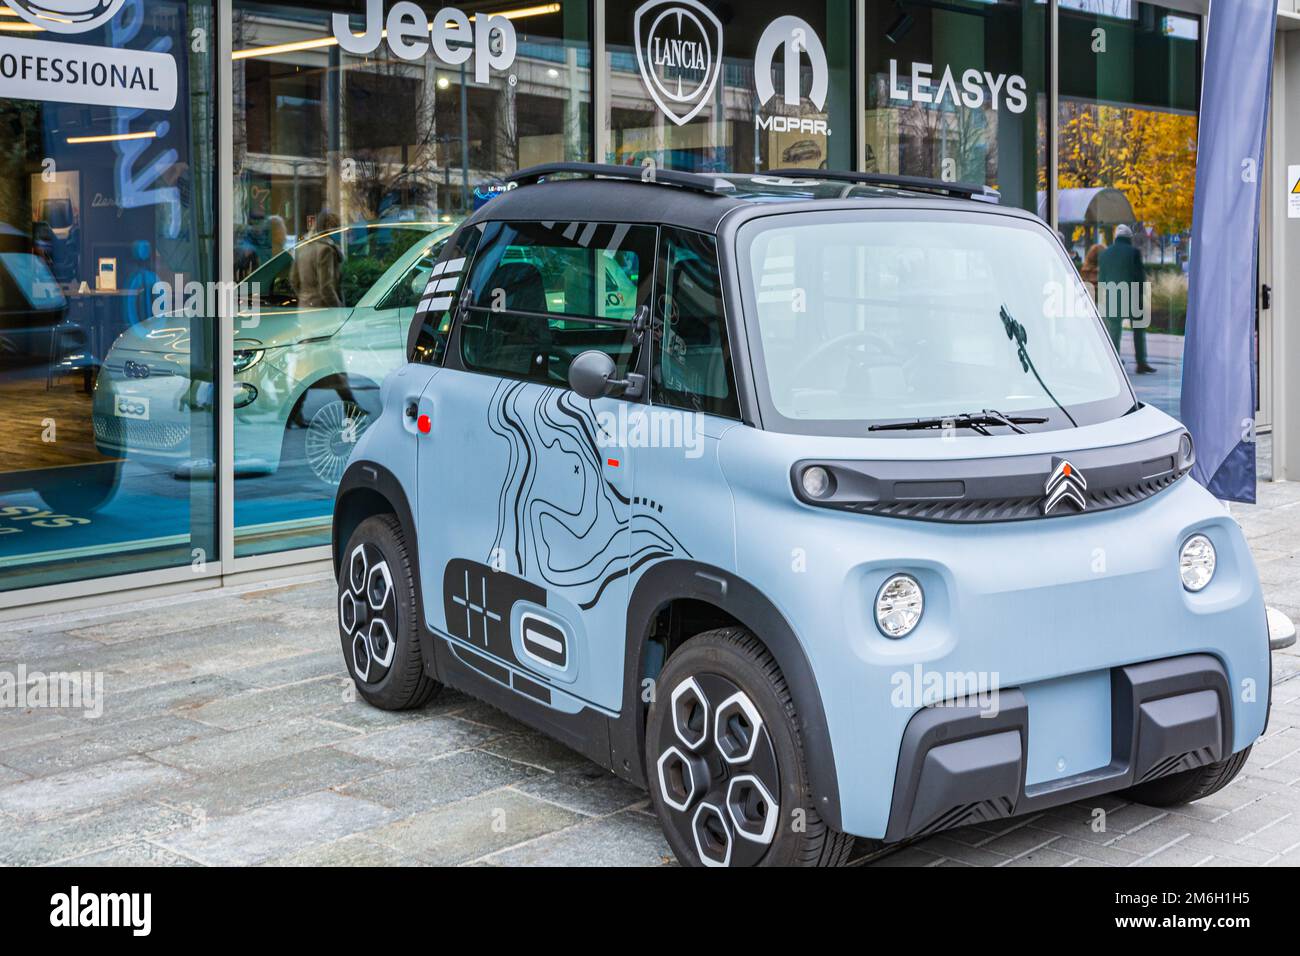 https://c8.alamy.com/comp/2M6H1H5/french-small-citroen-ami-electric-two-seater-micro-city-car-parked-in-front-of-the-green-pea-in-the-shopping-center-of-turin-piedmont-region-italy-2M6H1H5.jpg